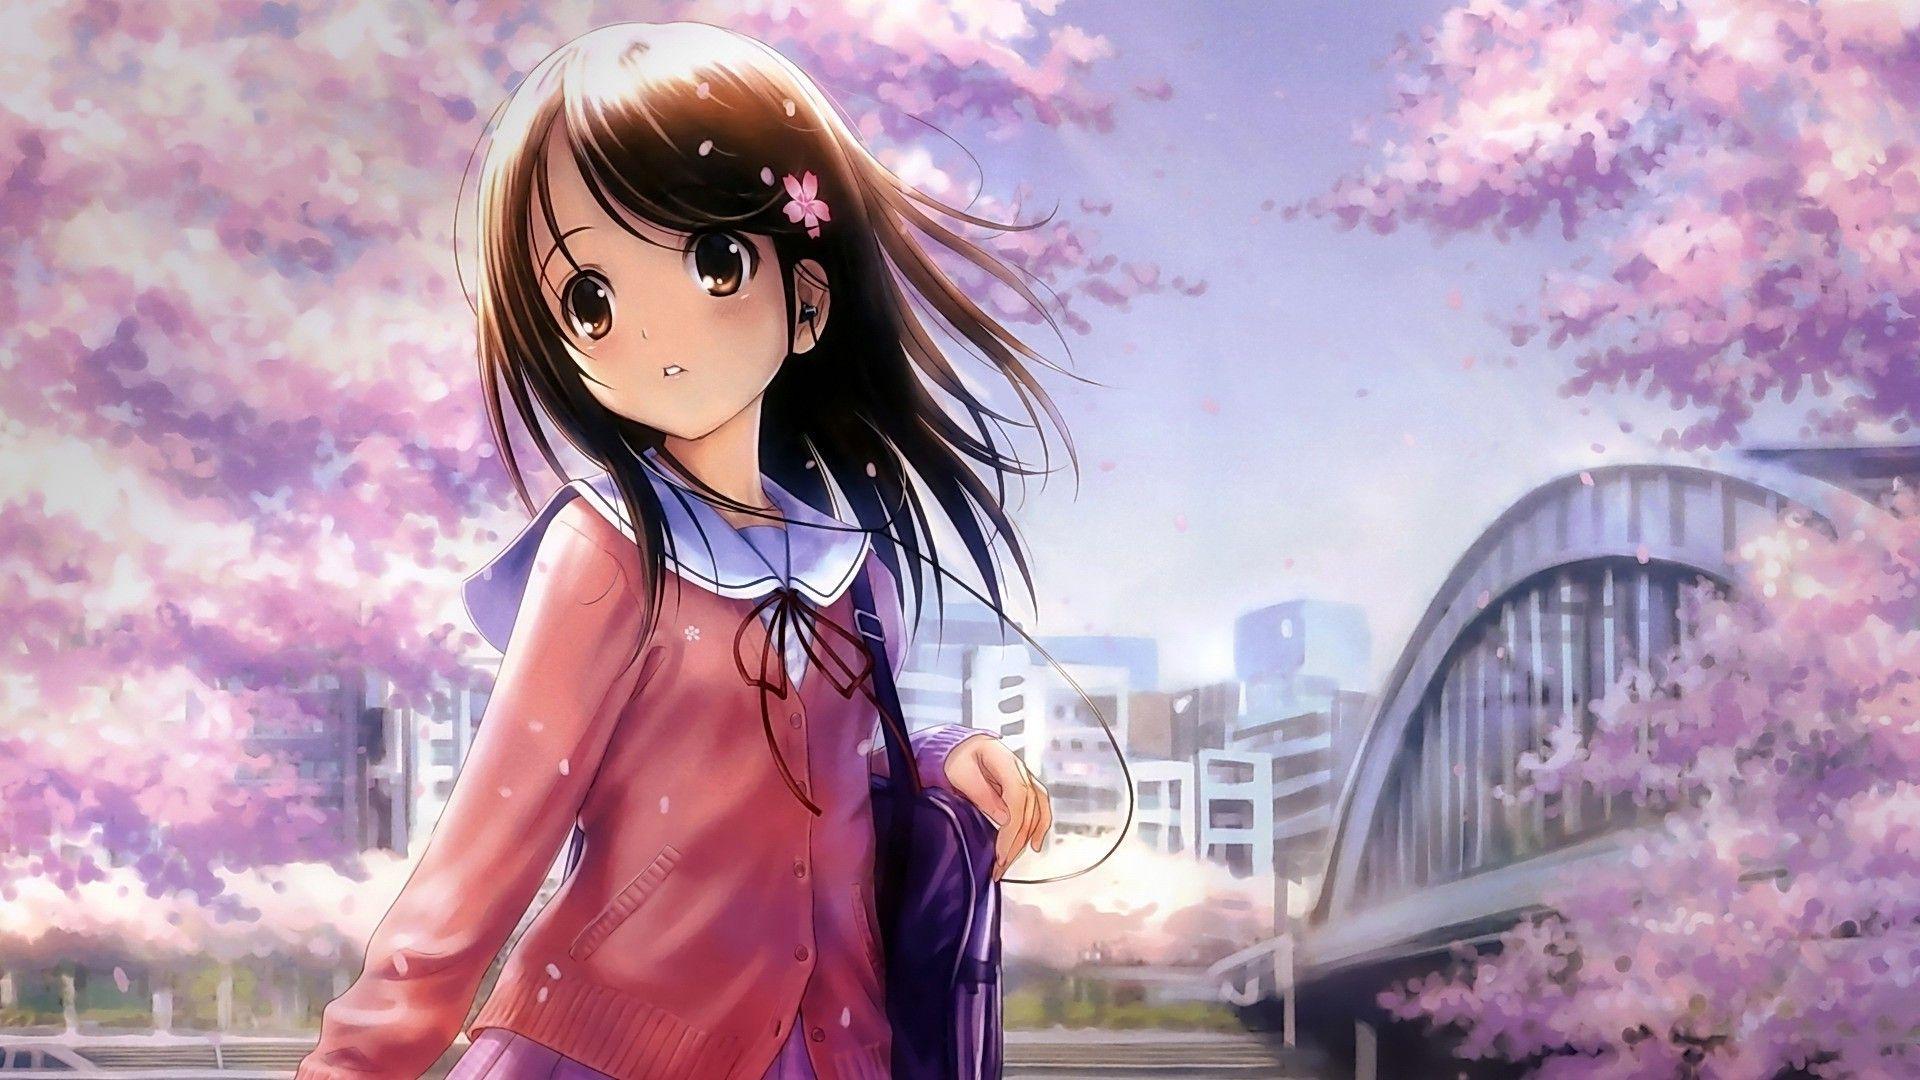 Cute Anime Wallpapers HD - Wallpaper Cave